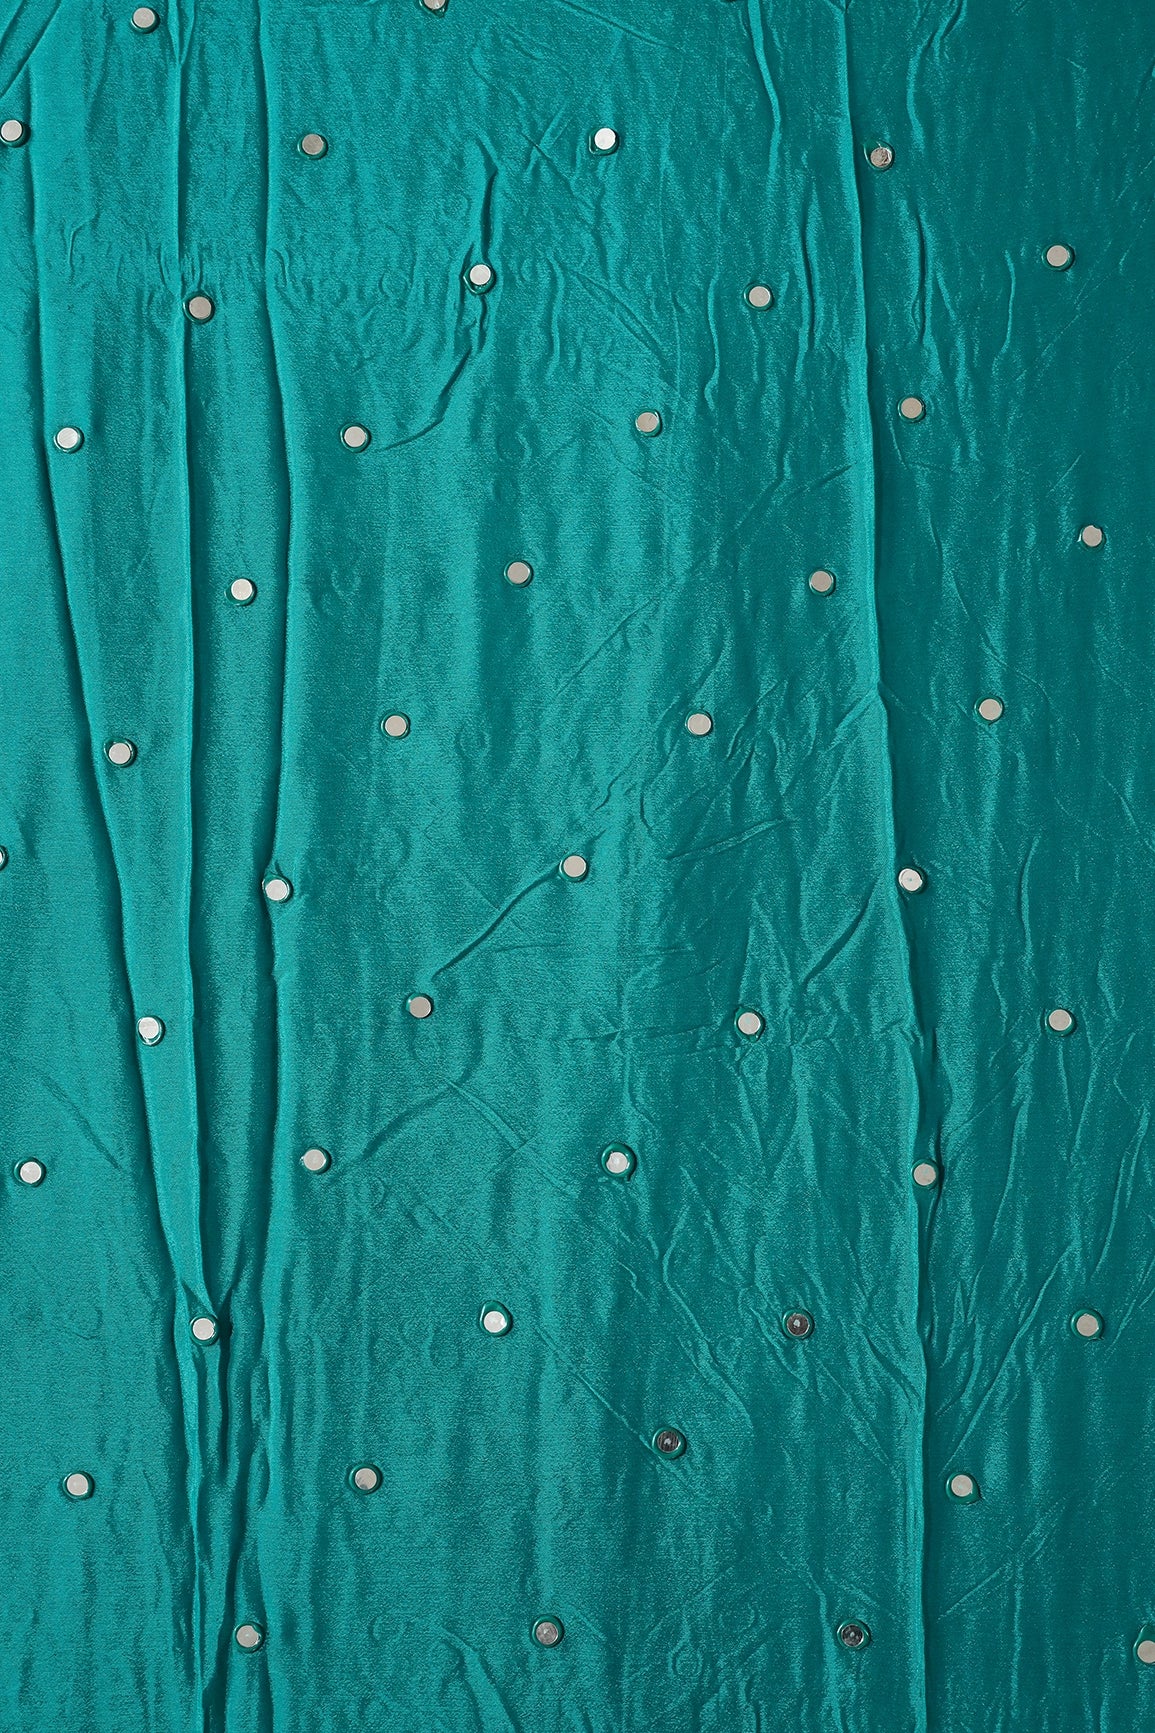 3.75 Meter Cut Piece Of Real Mirror Embroidery Work On Dark Turquoise Viscose Chinnon Chiffon Fabric